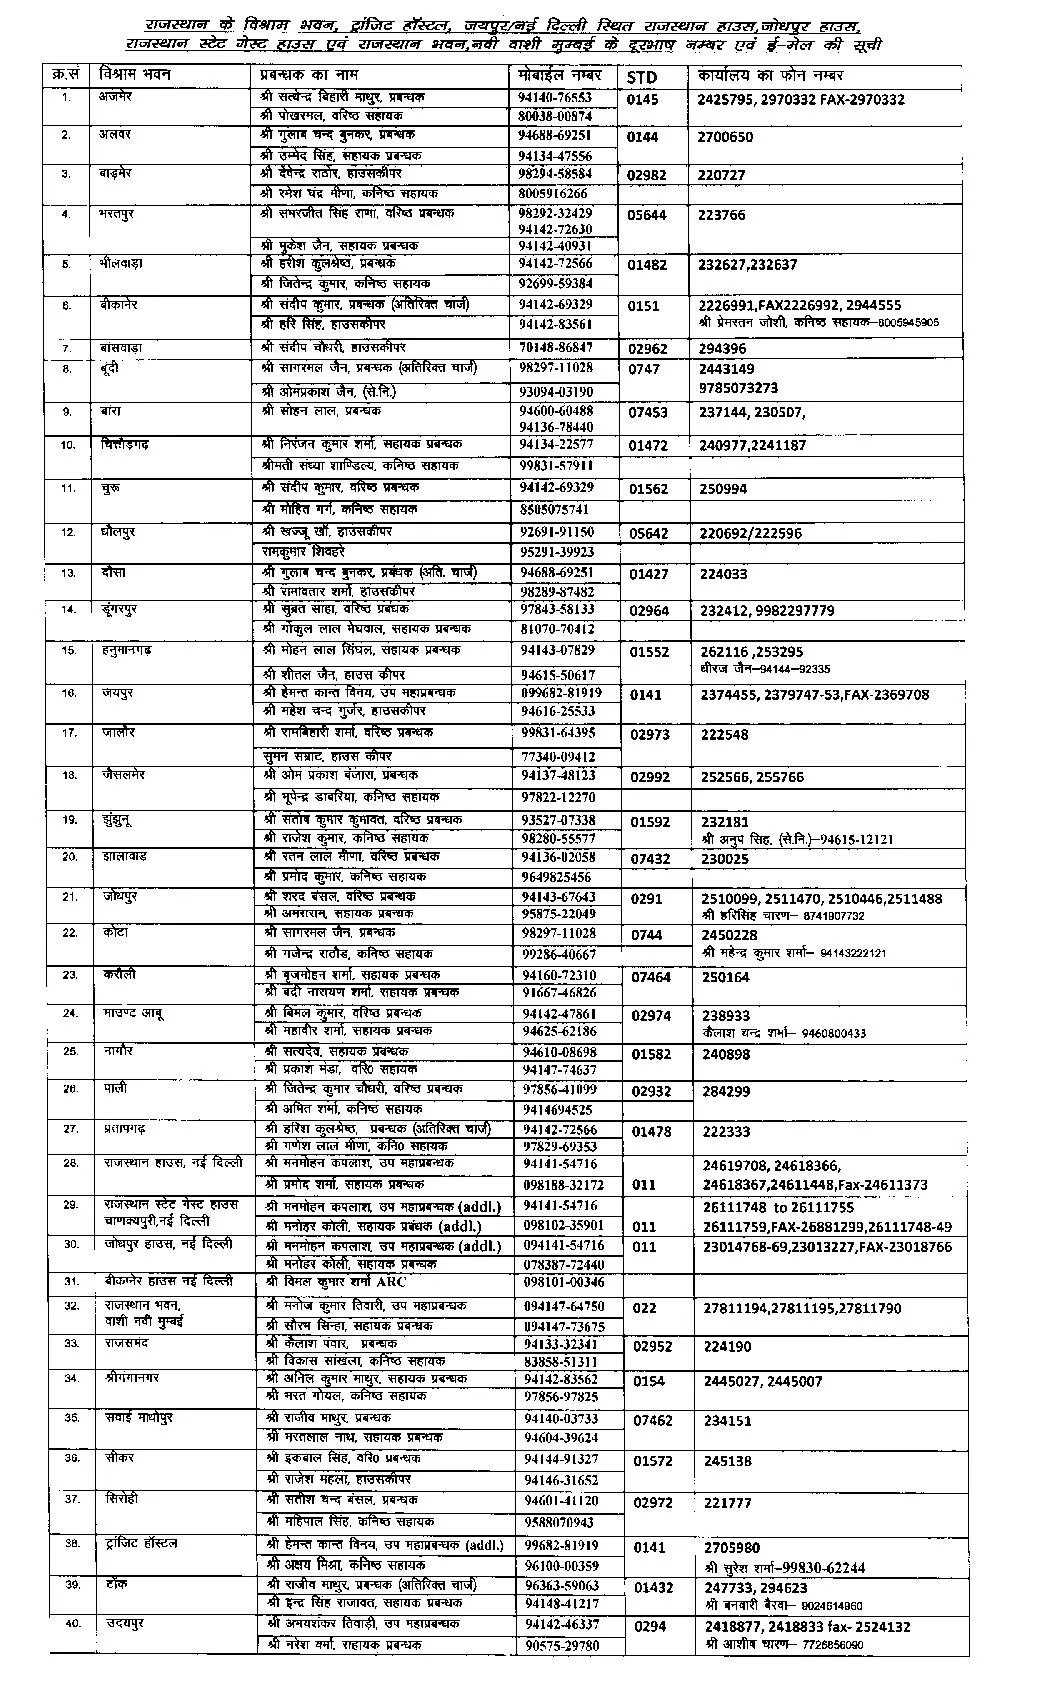 List of Telephone Numbers of Circuit House, Rajasthan